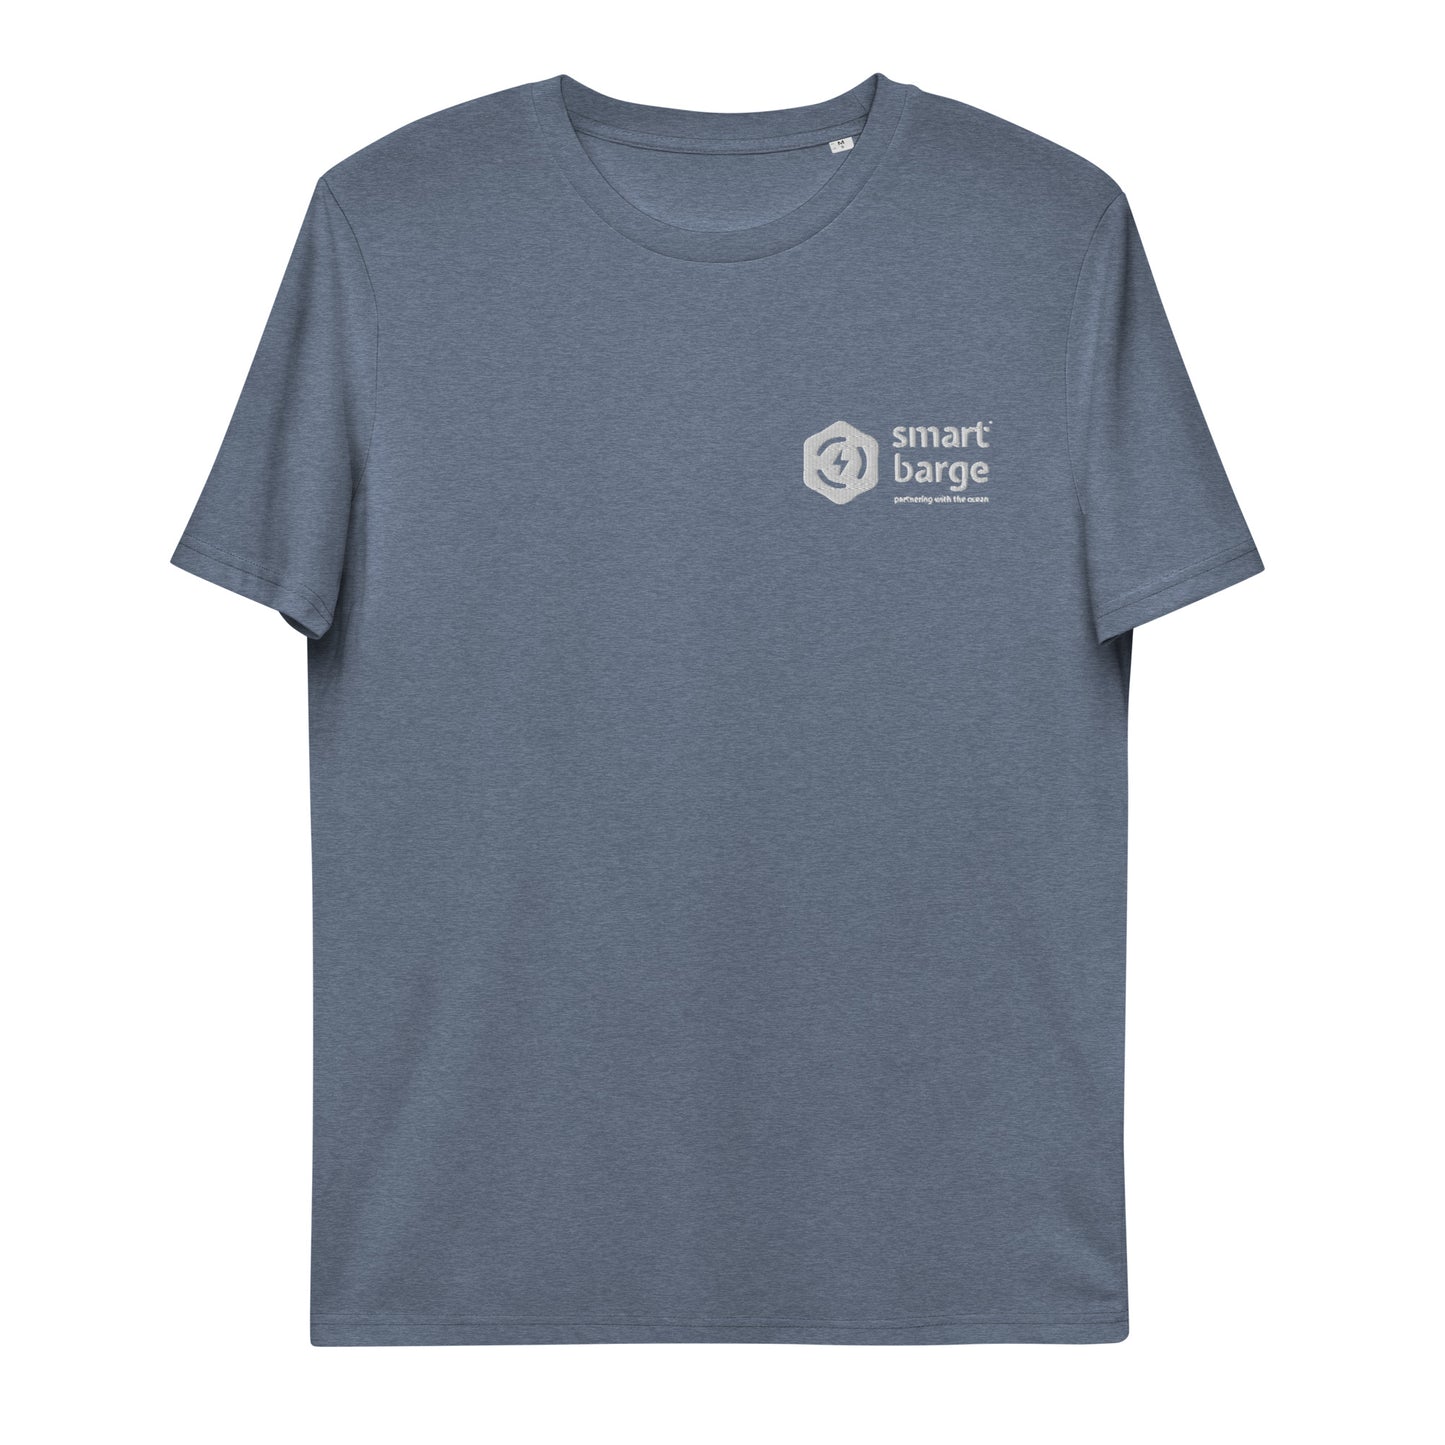 [UK-Delivery] Smart Barge 'Partnering With The Ocean' Unisex Organic Cotton T-shirt